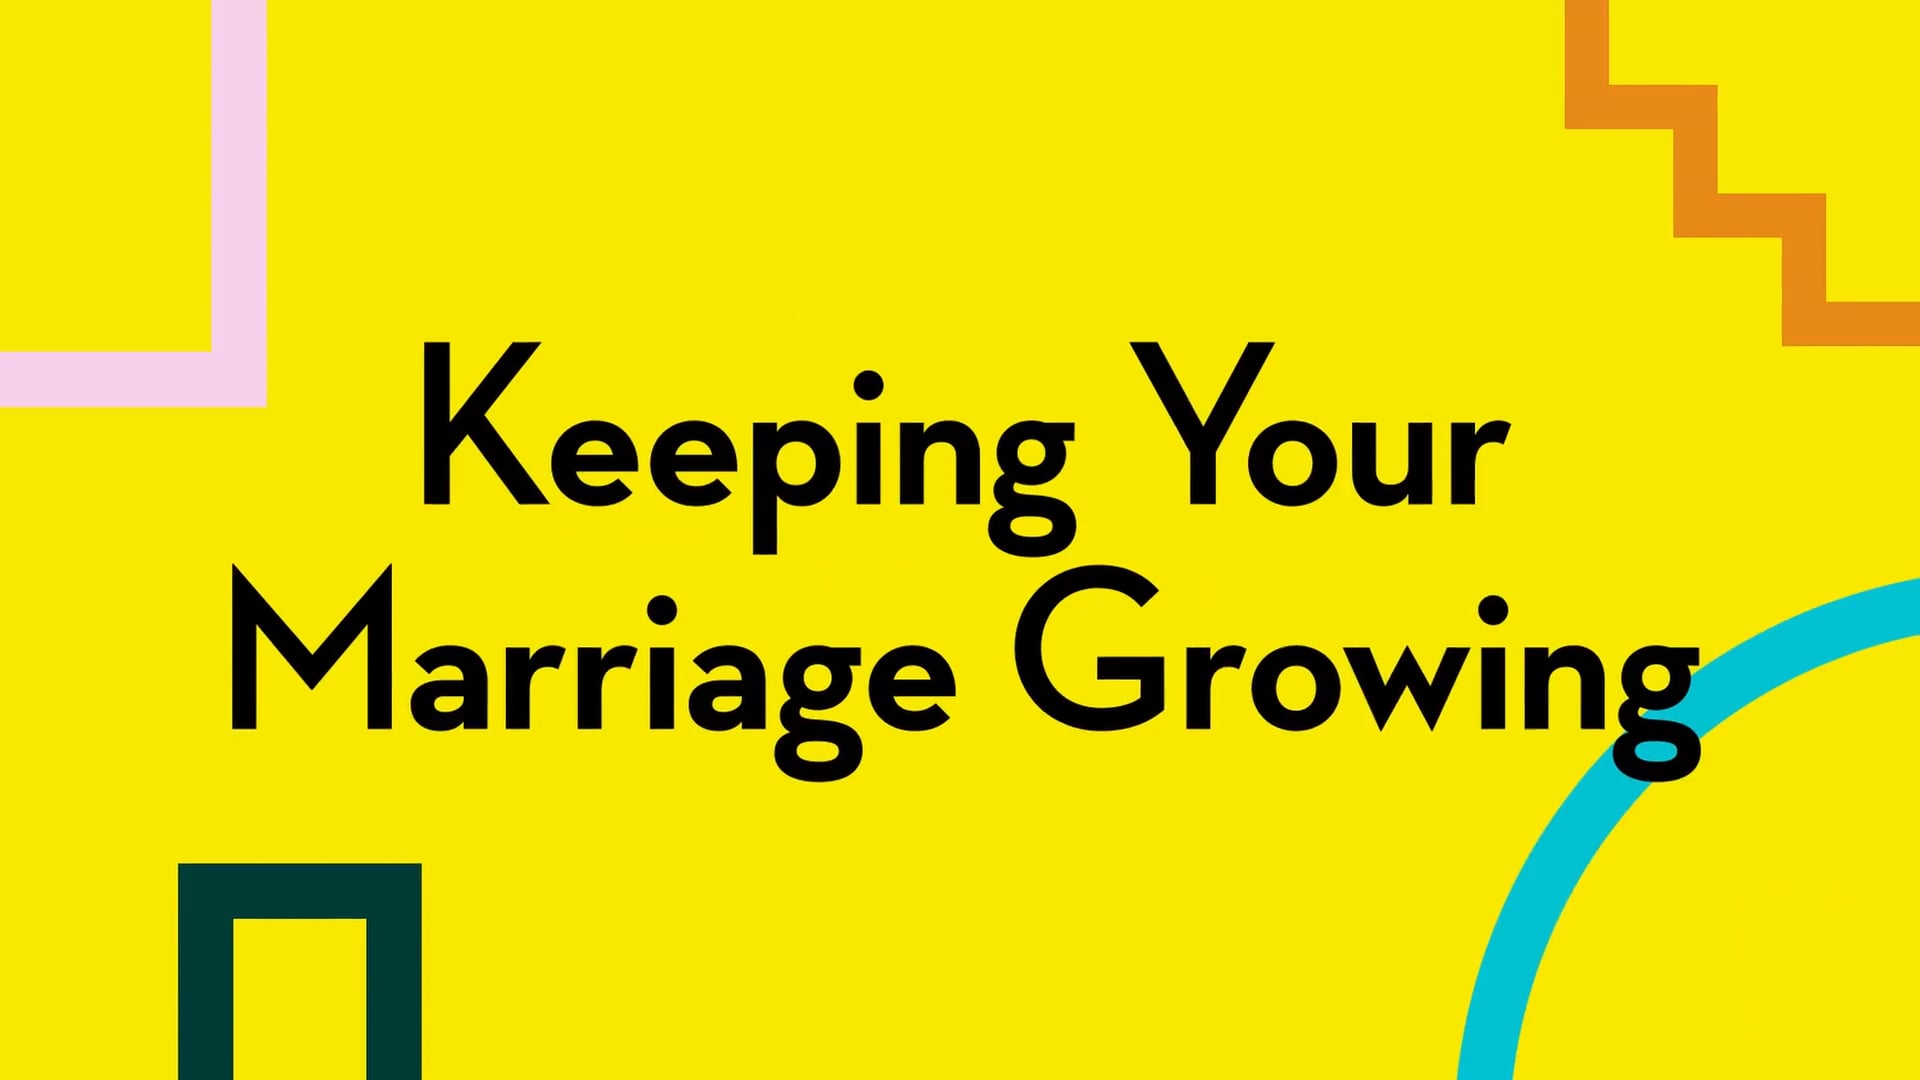 Keep Your Marriage Growing